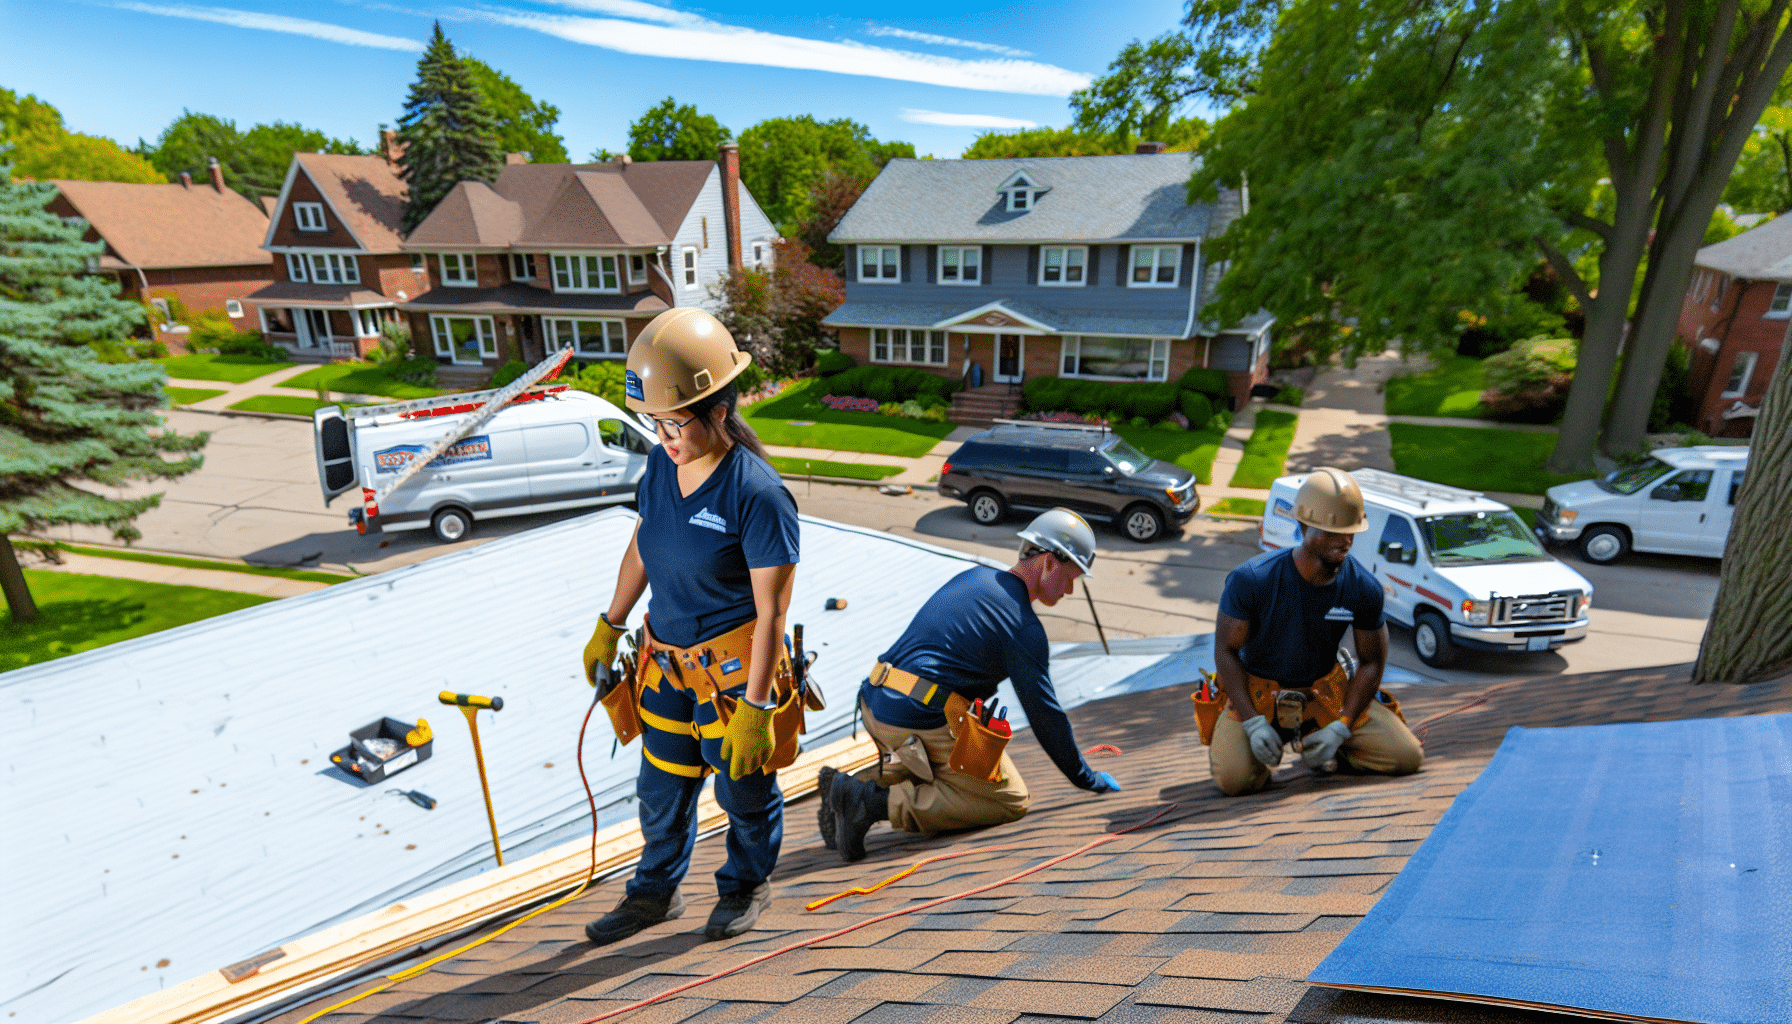 Expert roof replacement service in Ann Arbor, MI